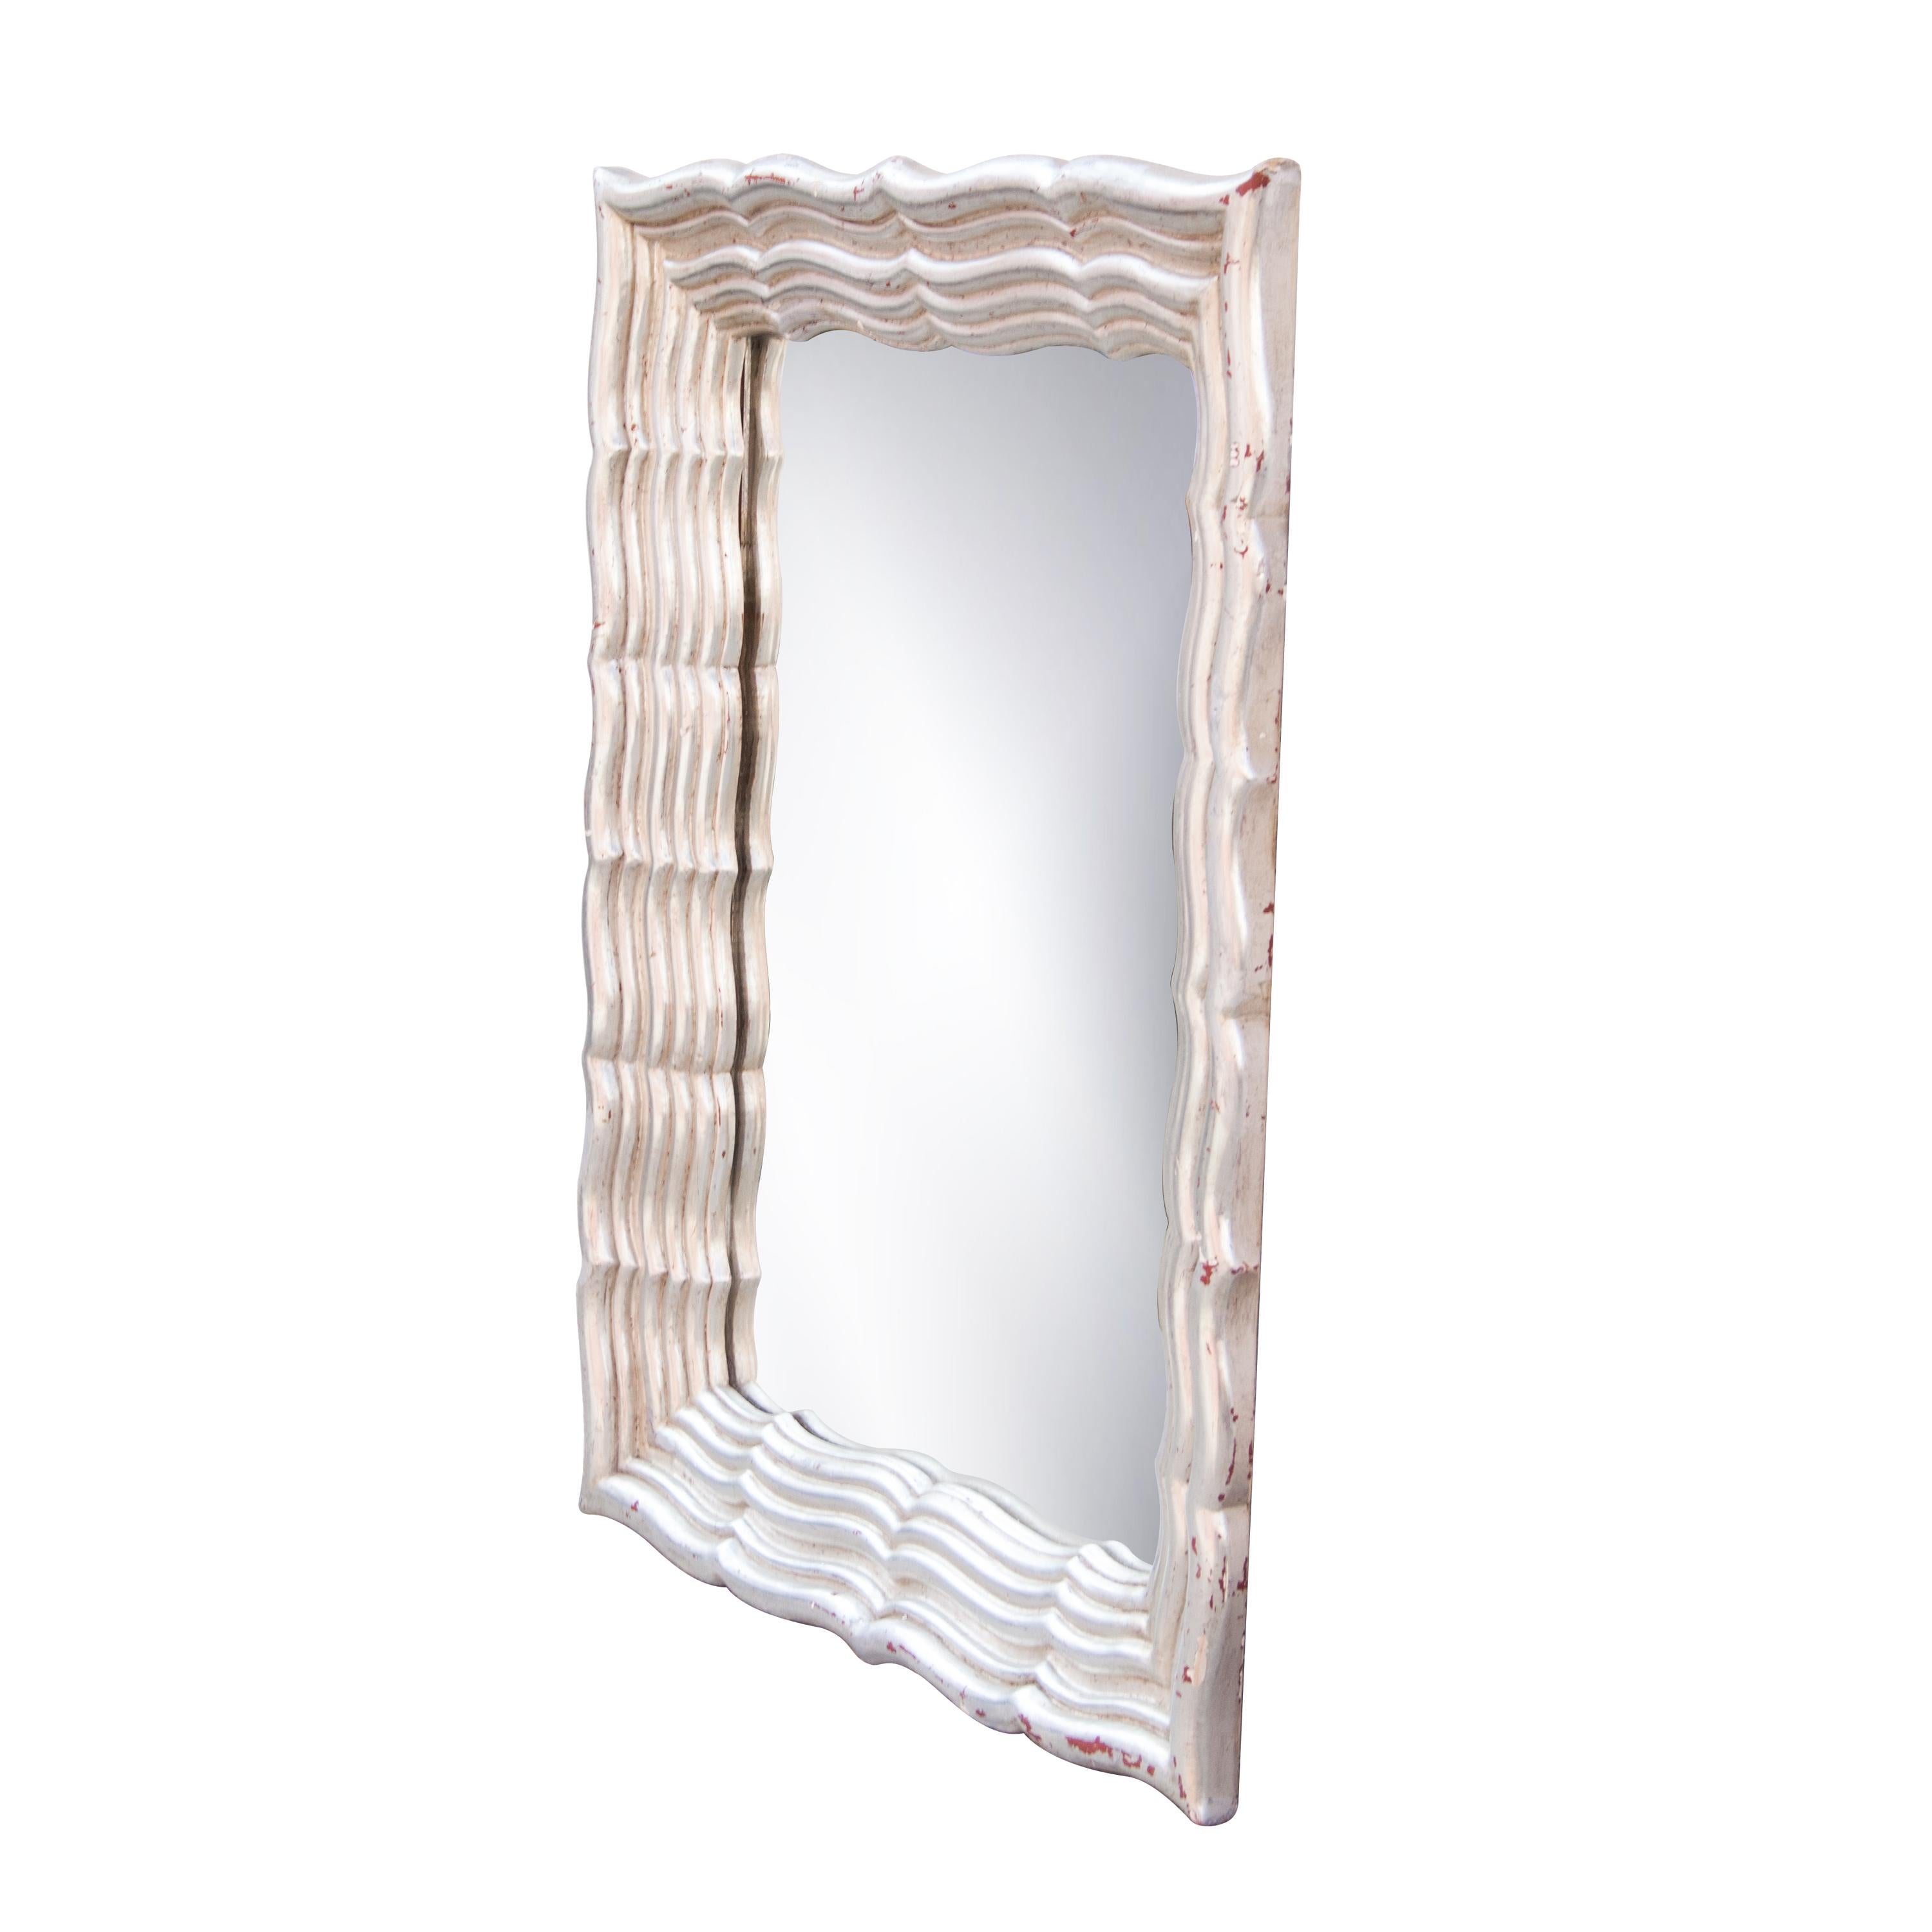 Neoclassical Regency style handcrafted mirror. Rectangular hand carved wooden structure with silver foiled finish, Spain, 1970.